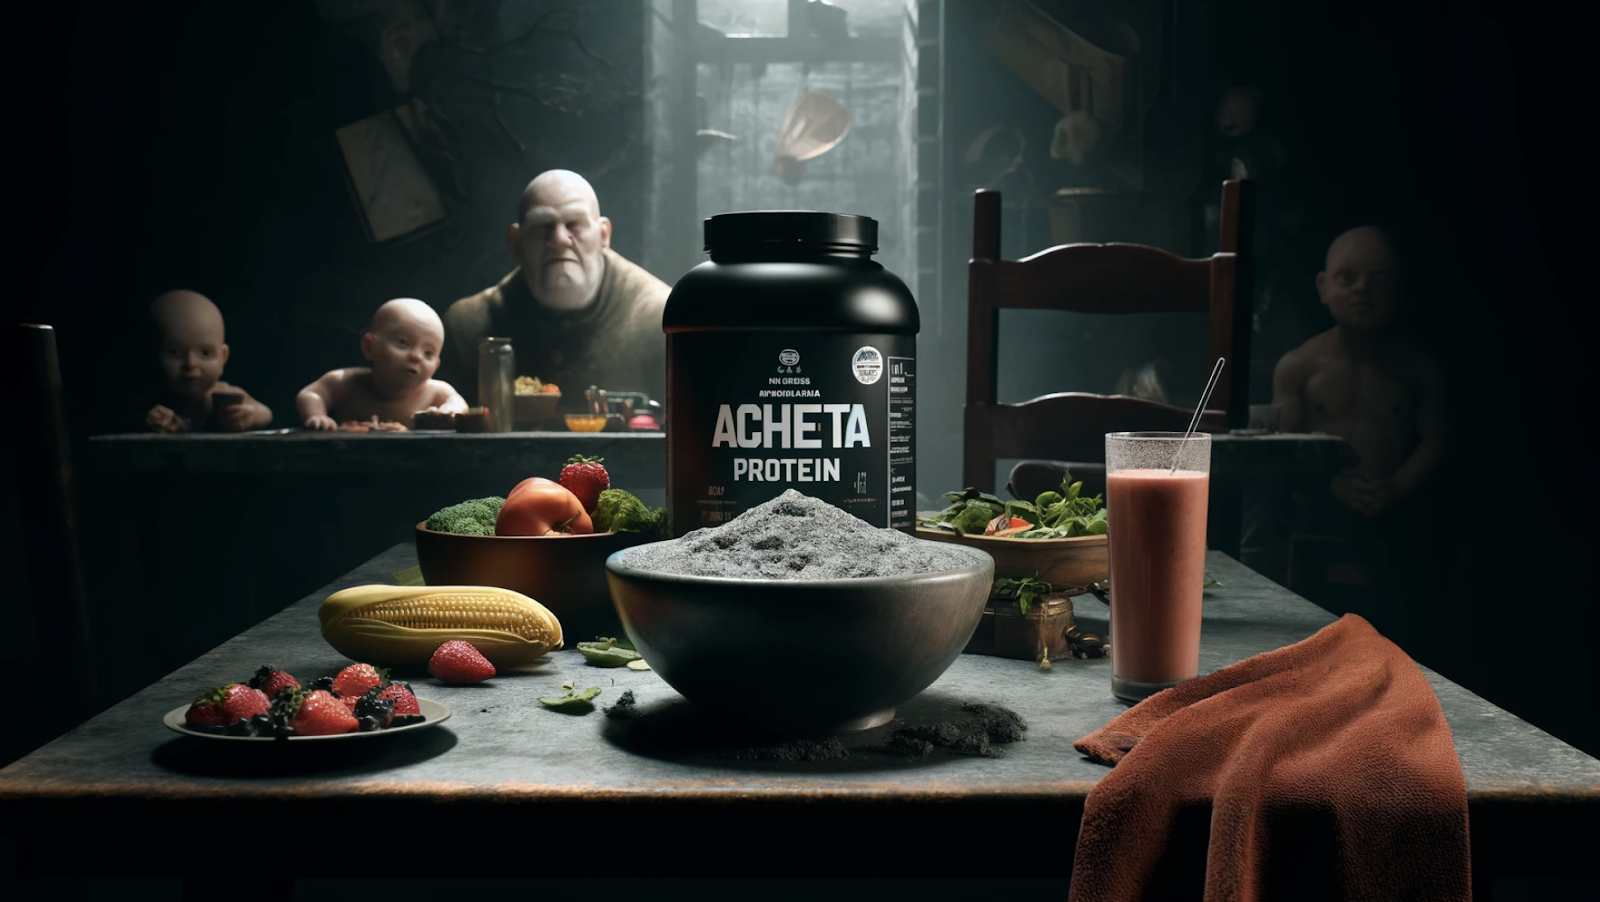 My Experience with Acheta Protein: Why I Wouldn't Recommend It